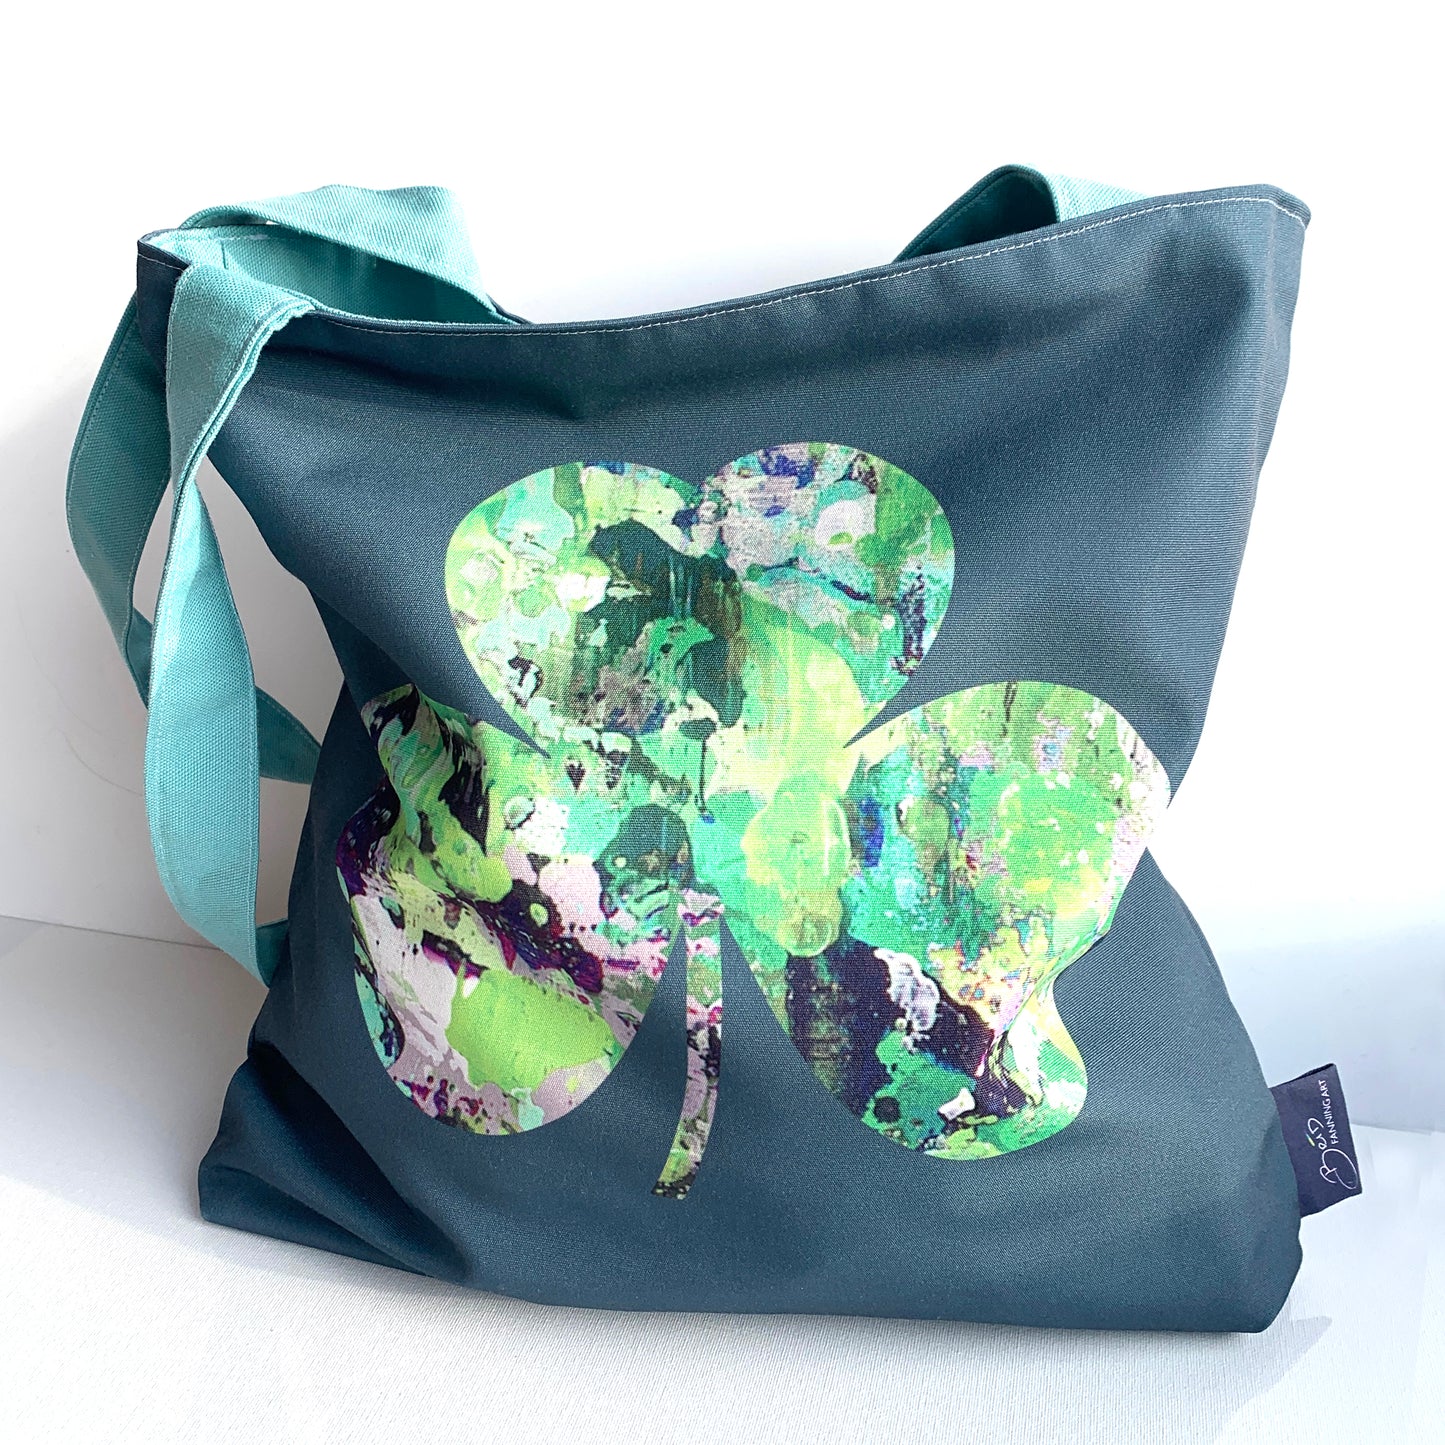 "Adh mor ort" sustainable art bag